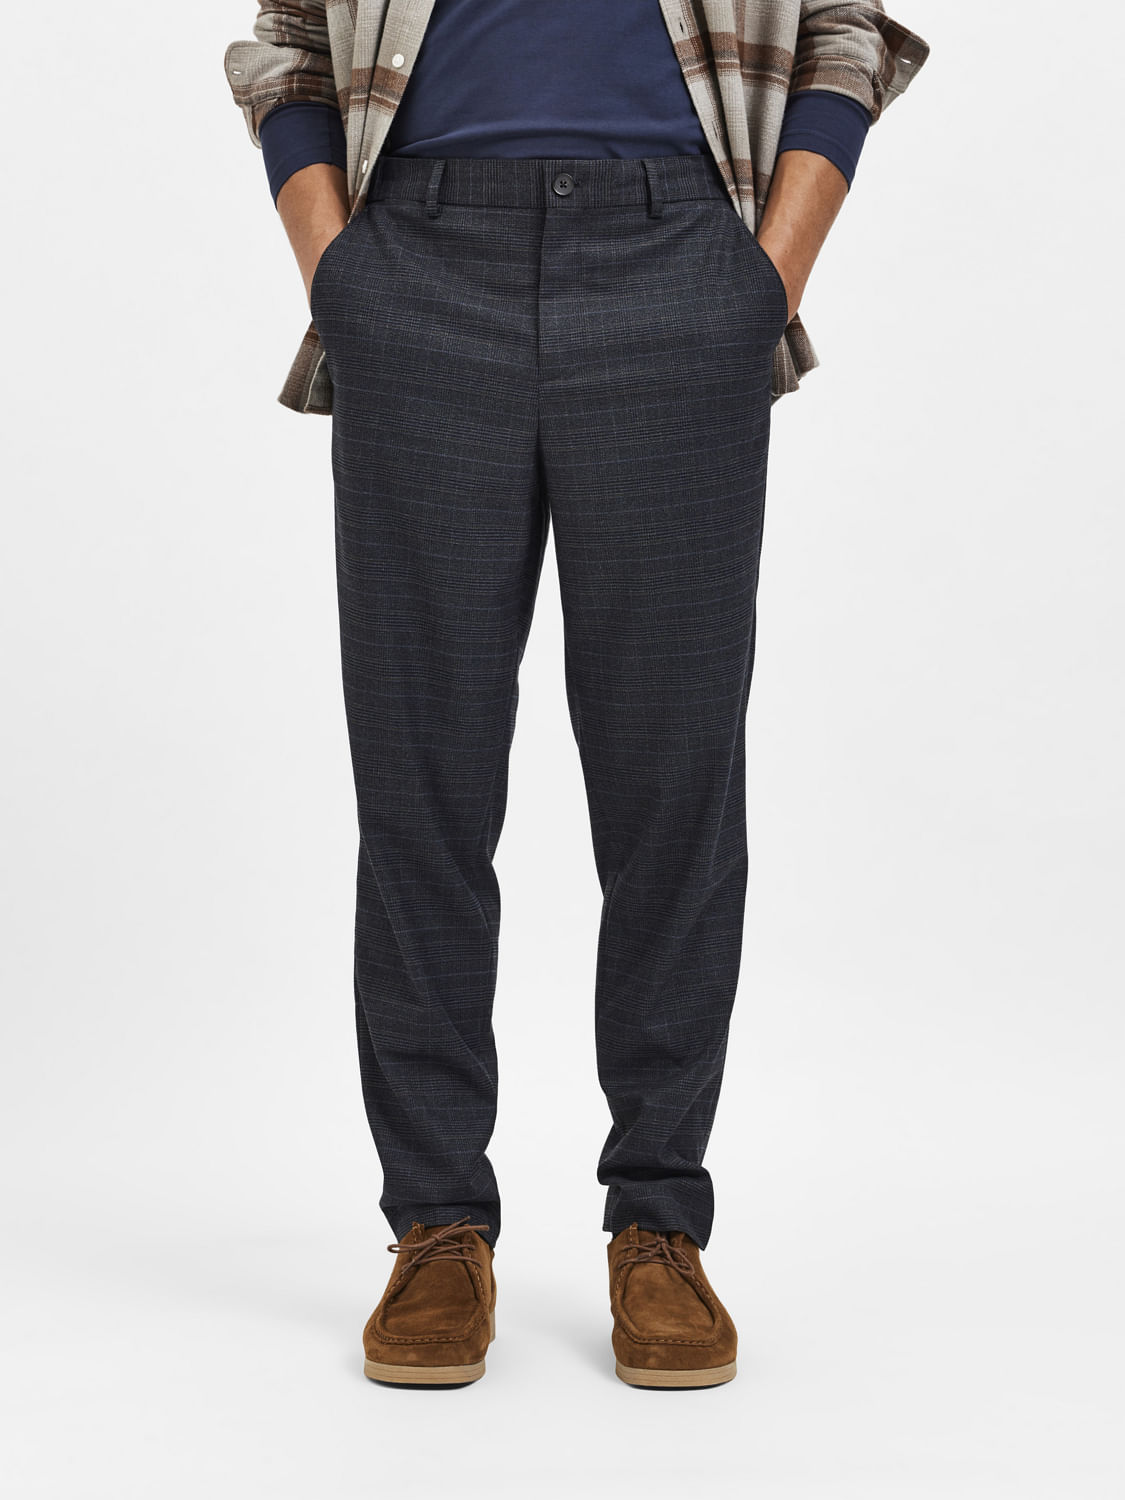 Buy SELECTED Blue Woollen Smart Casual Trousers  Trousers for Men 1428801   Myntra